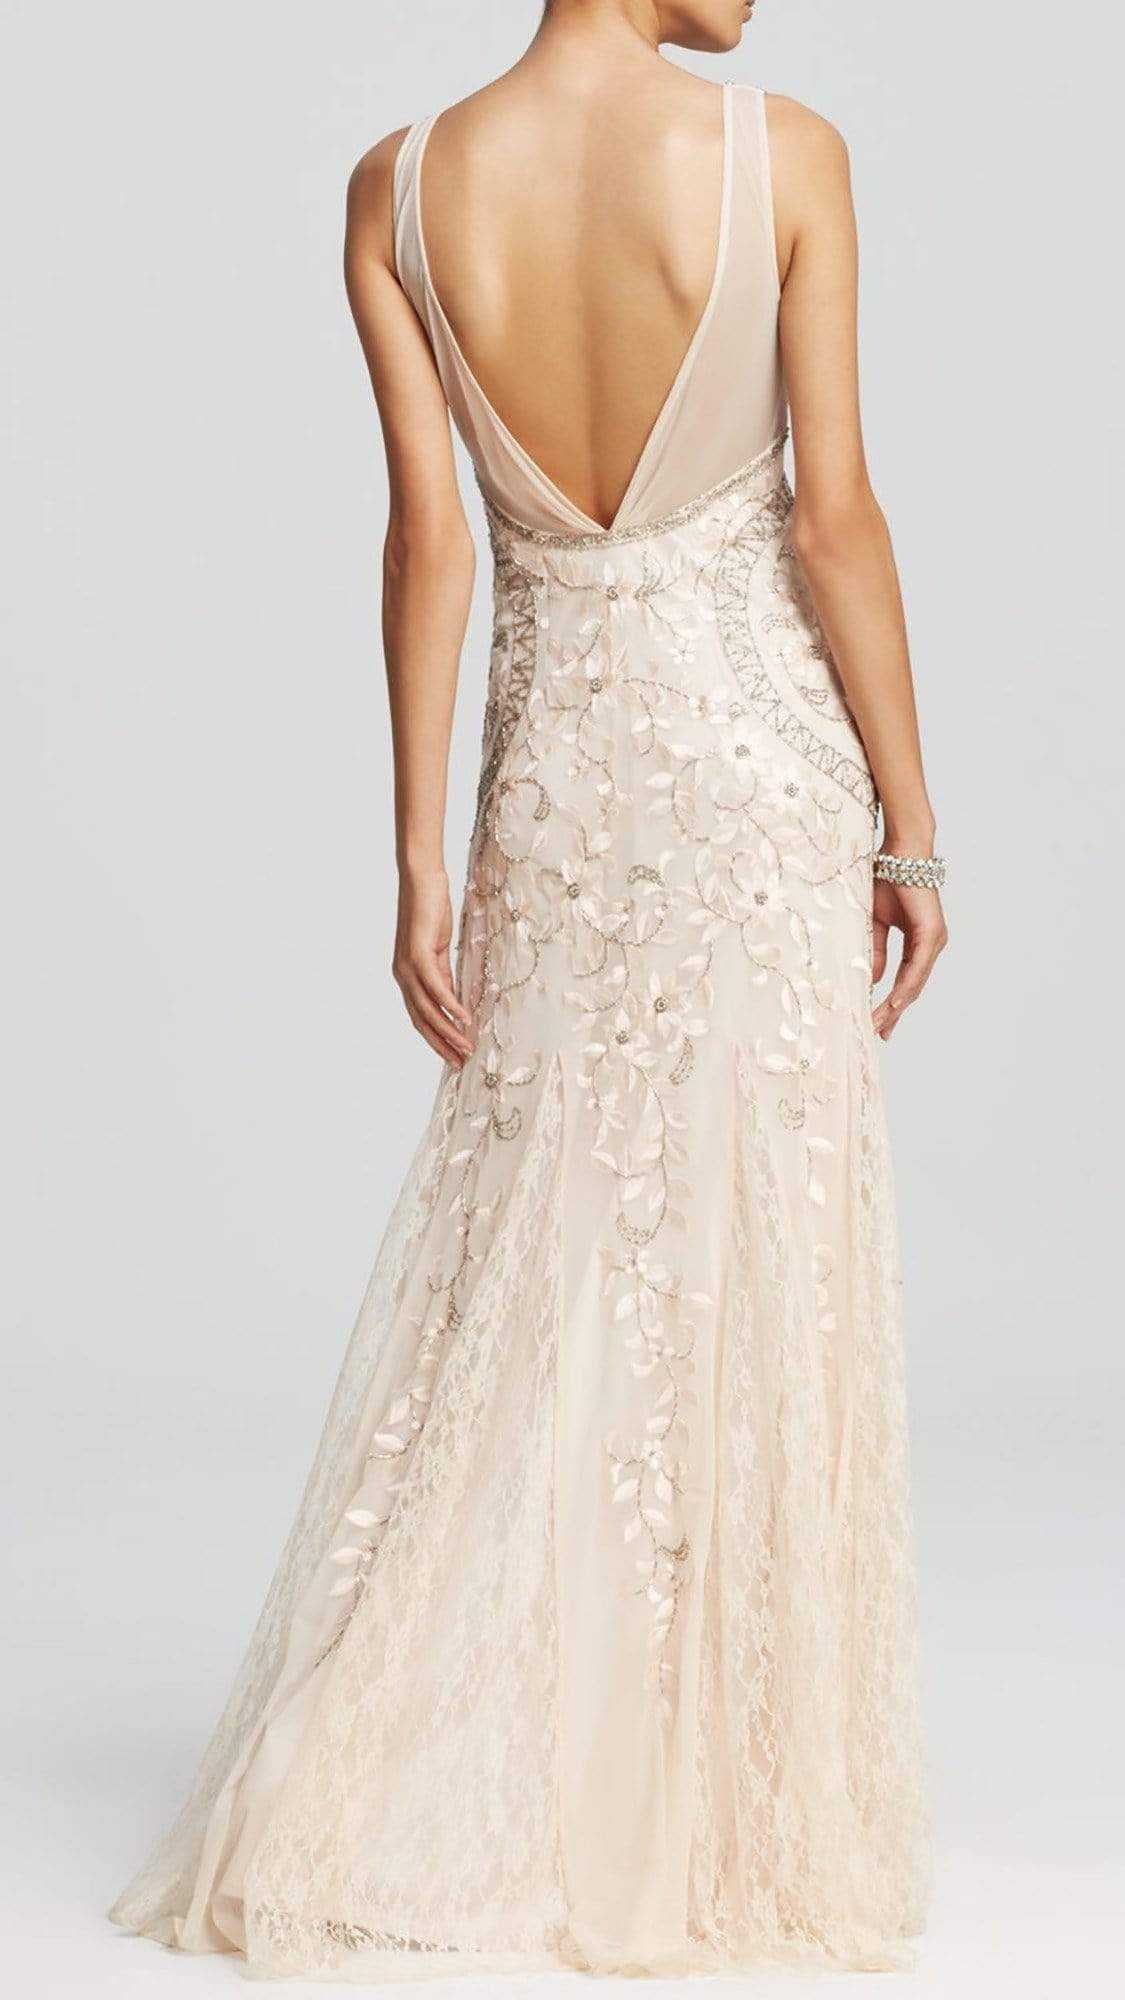 Sue Wong, Sue Wong Sleeveless Embellished Long Dress N1118 - 1 pc Ivory in Size 6 available